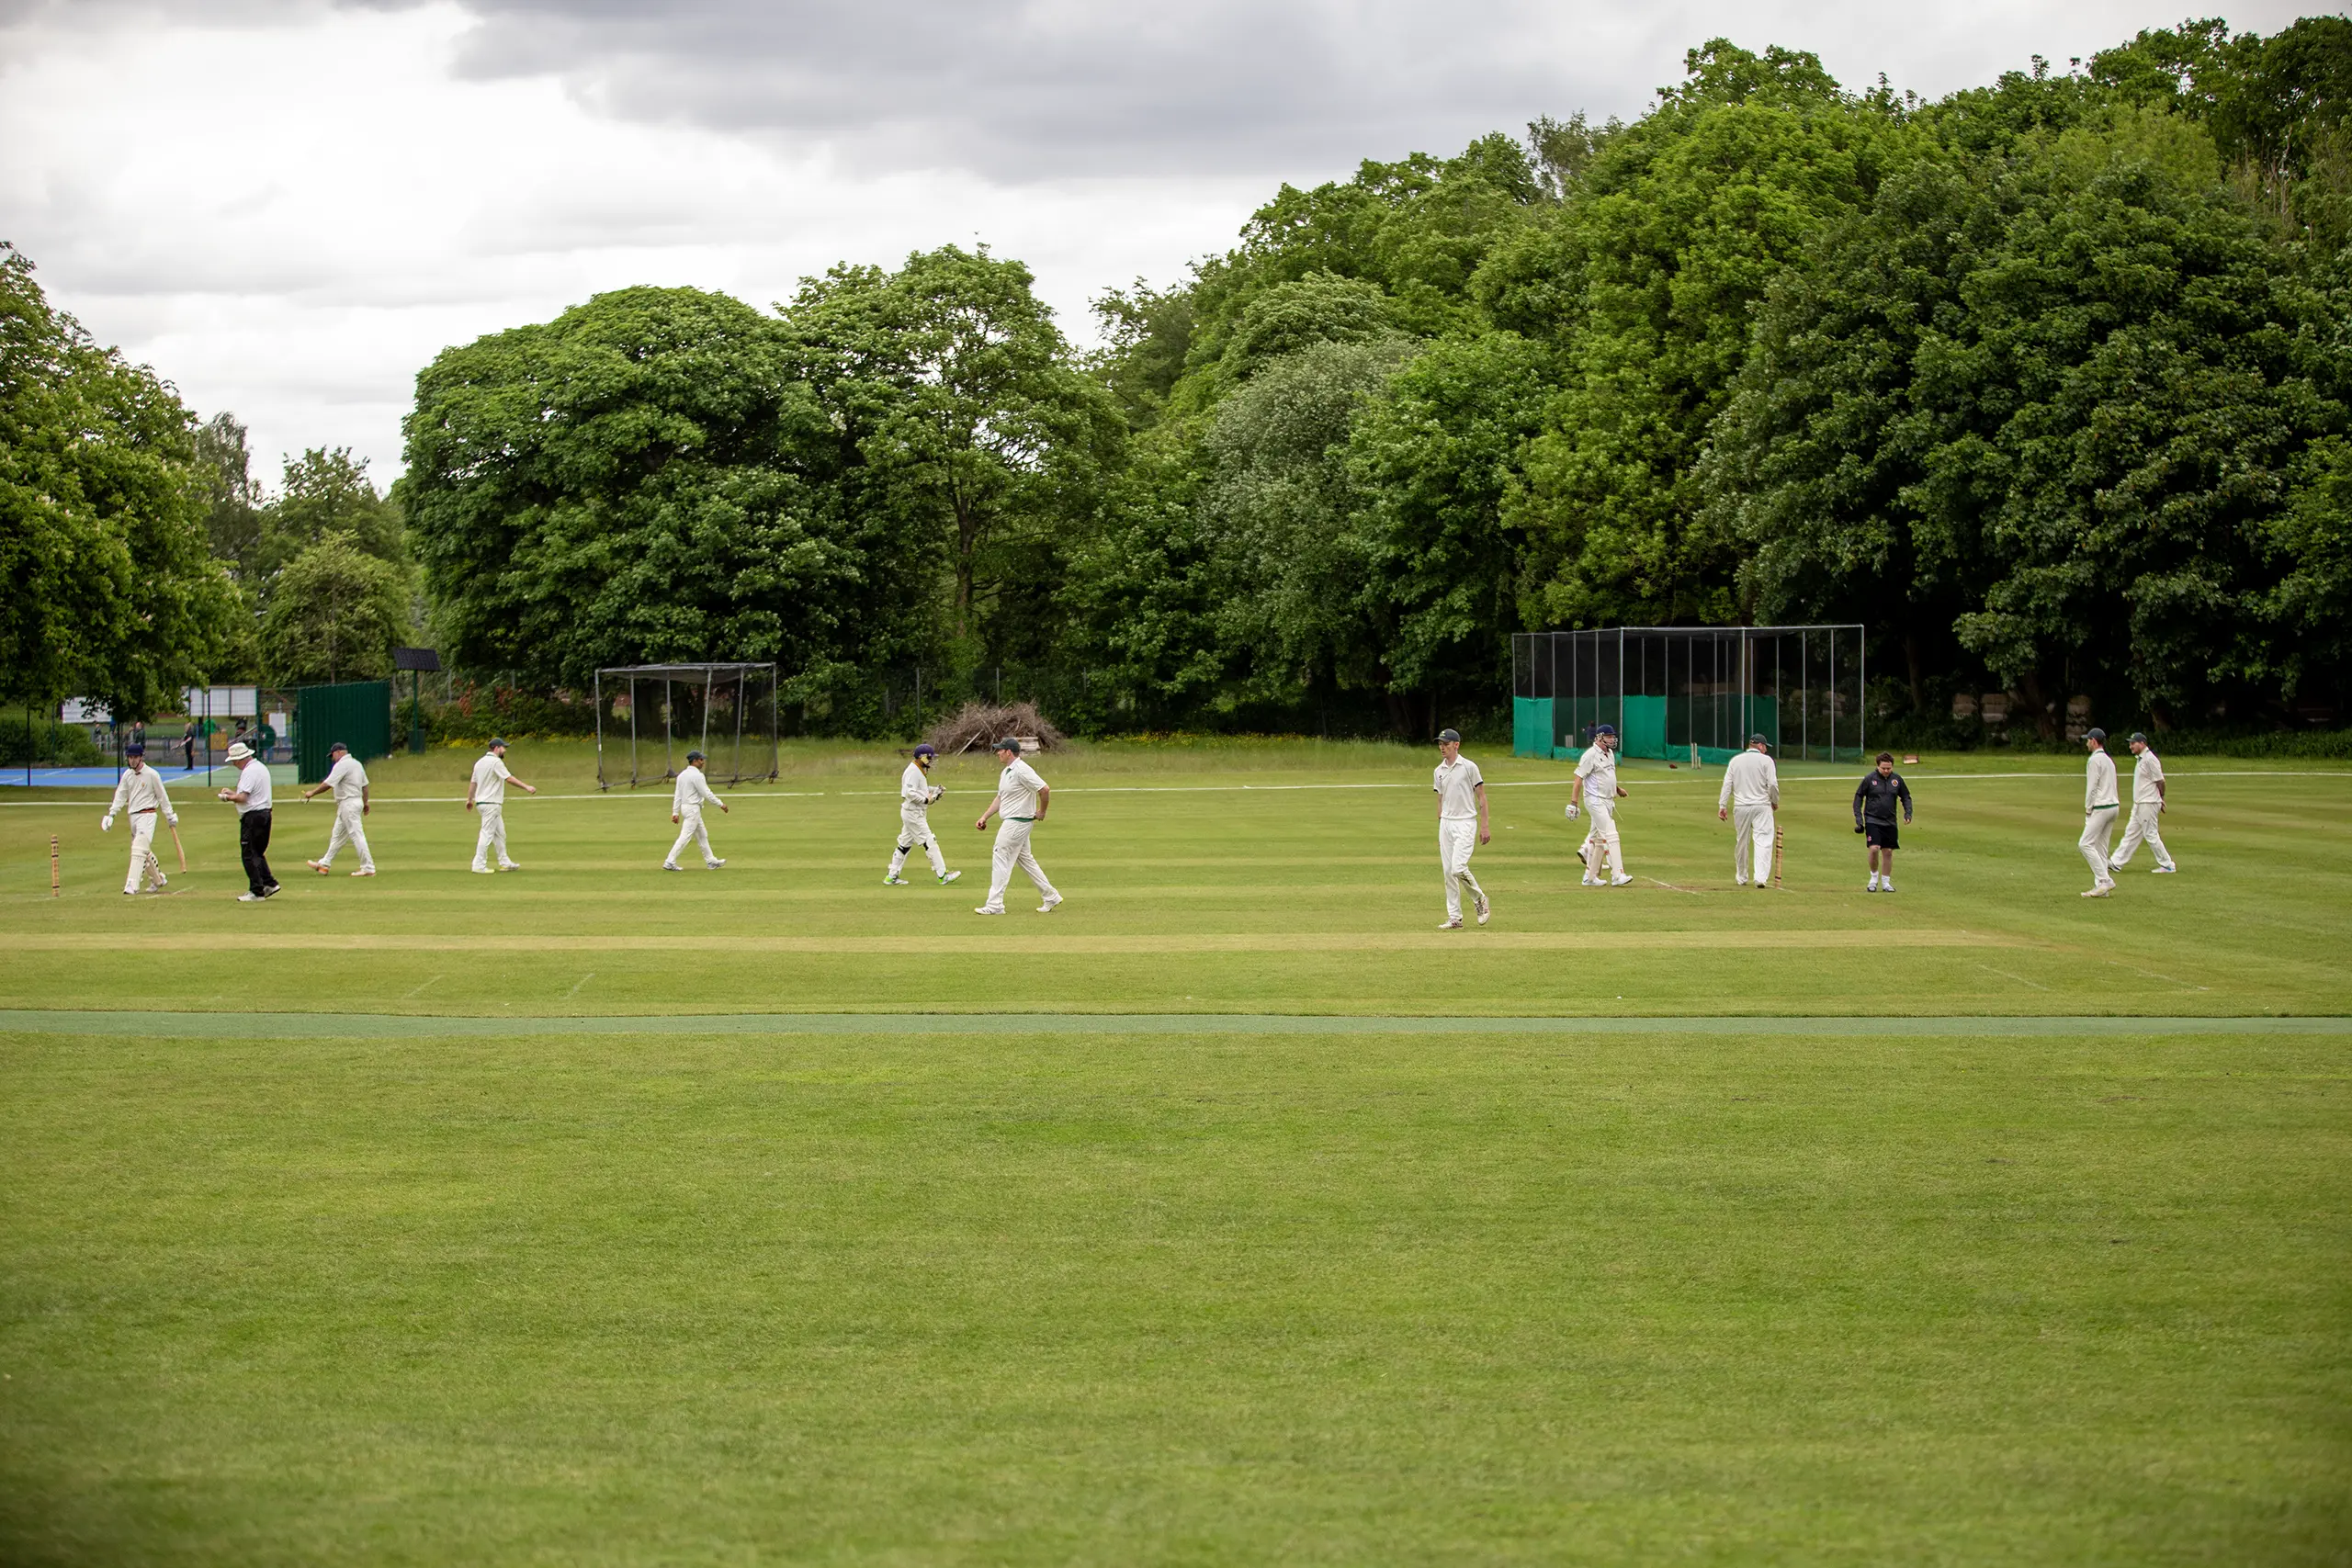 Whitefield cricket club